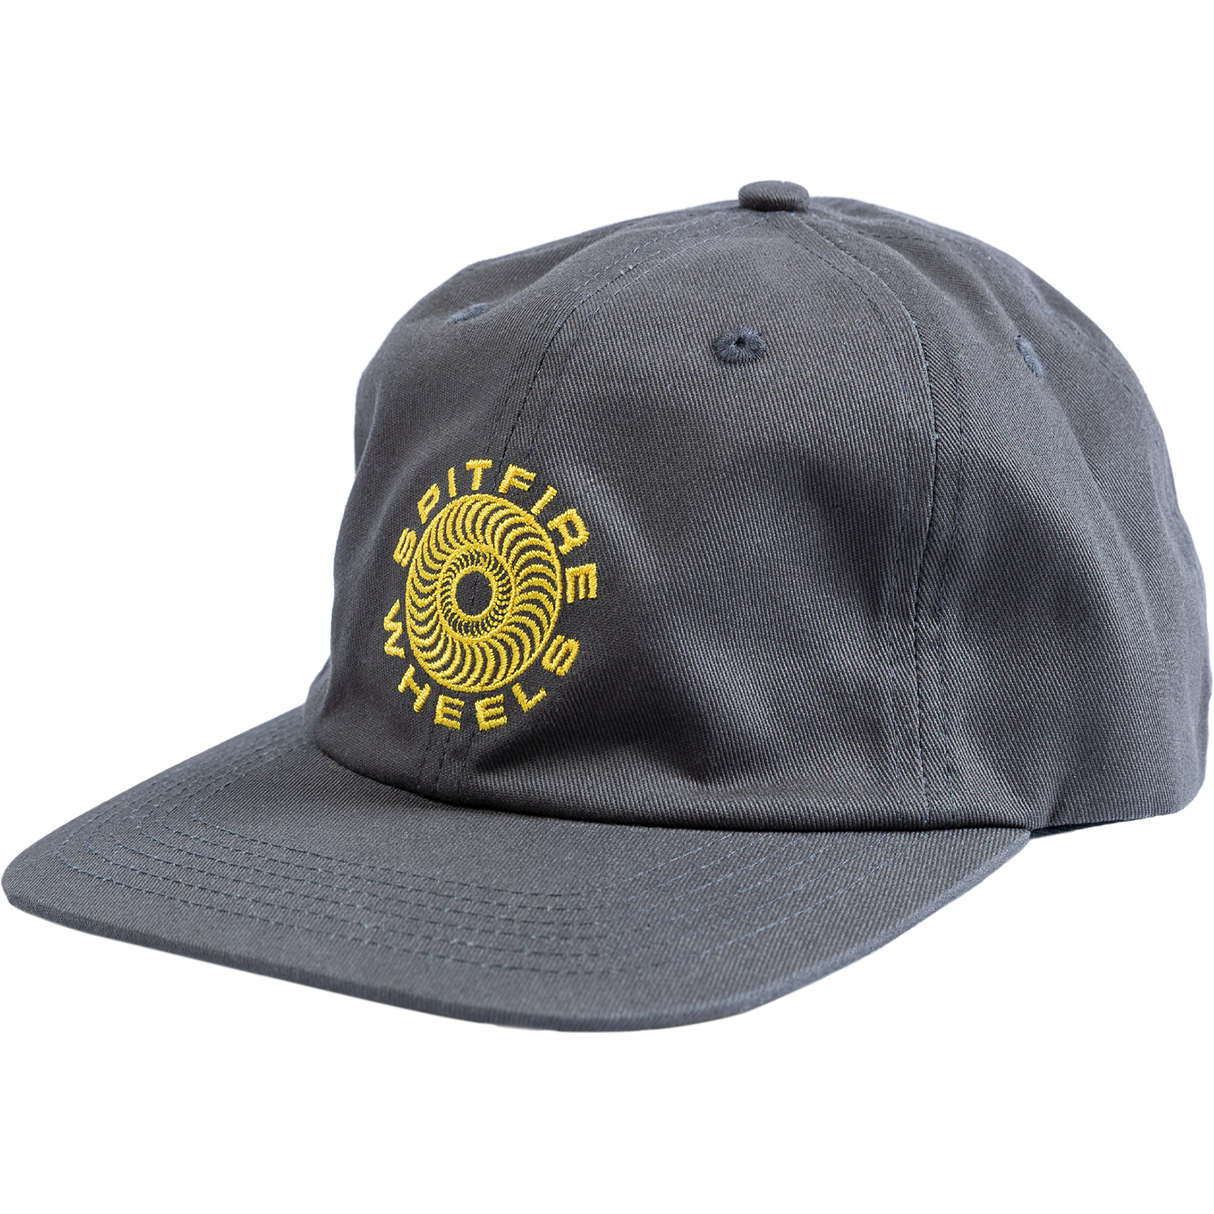 Spitfire Classic 87 Swirl Patch Snapback Hat - Charcoal/Gold